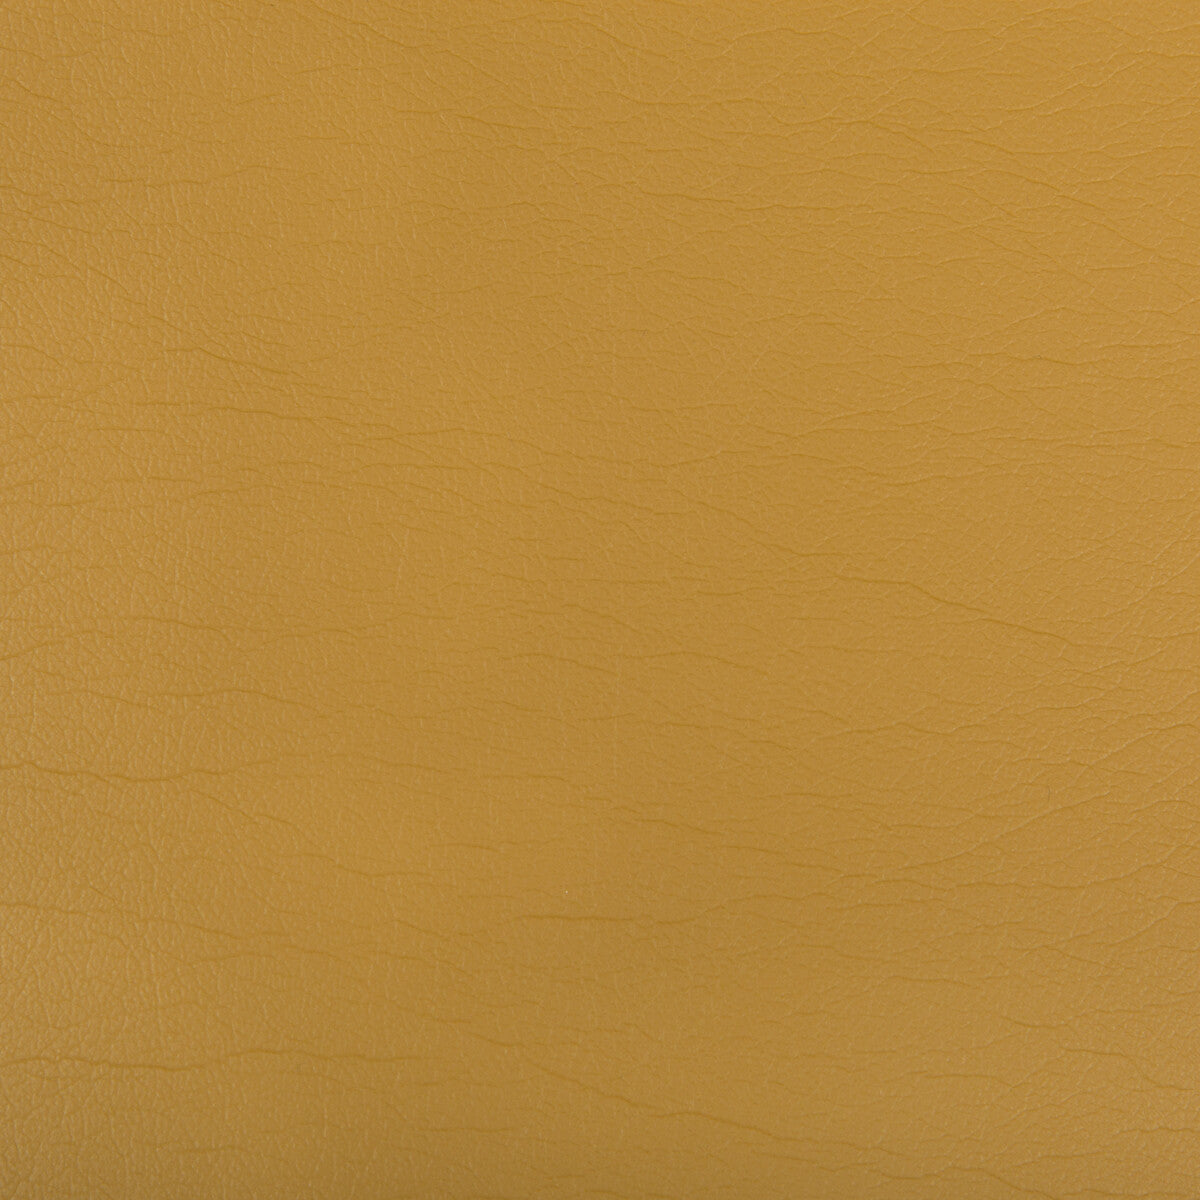 Optima fabric in ochre color - pattern OPTIMA.4.0 - by Kravet Contract